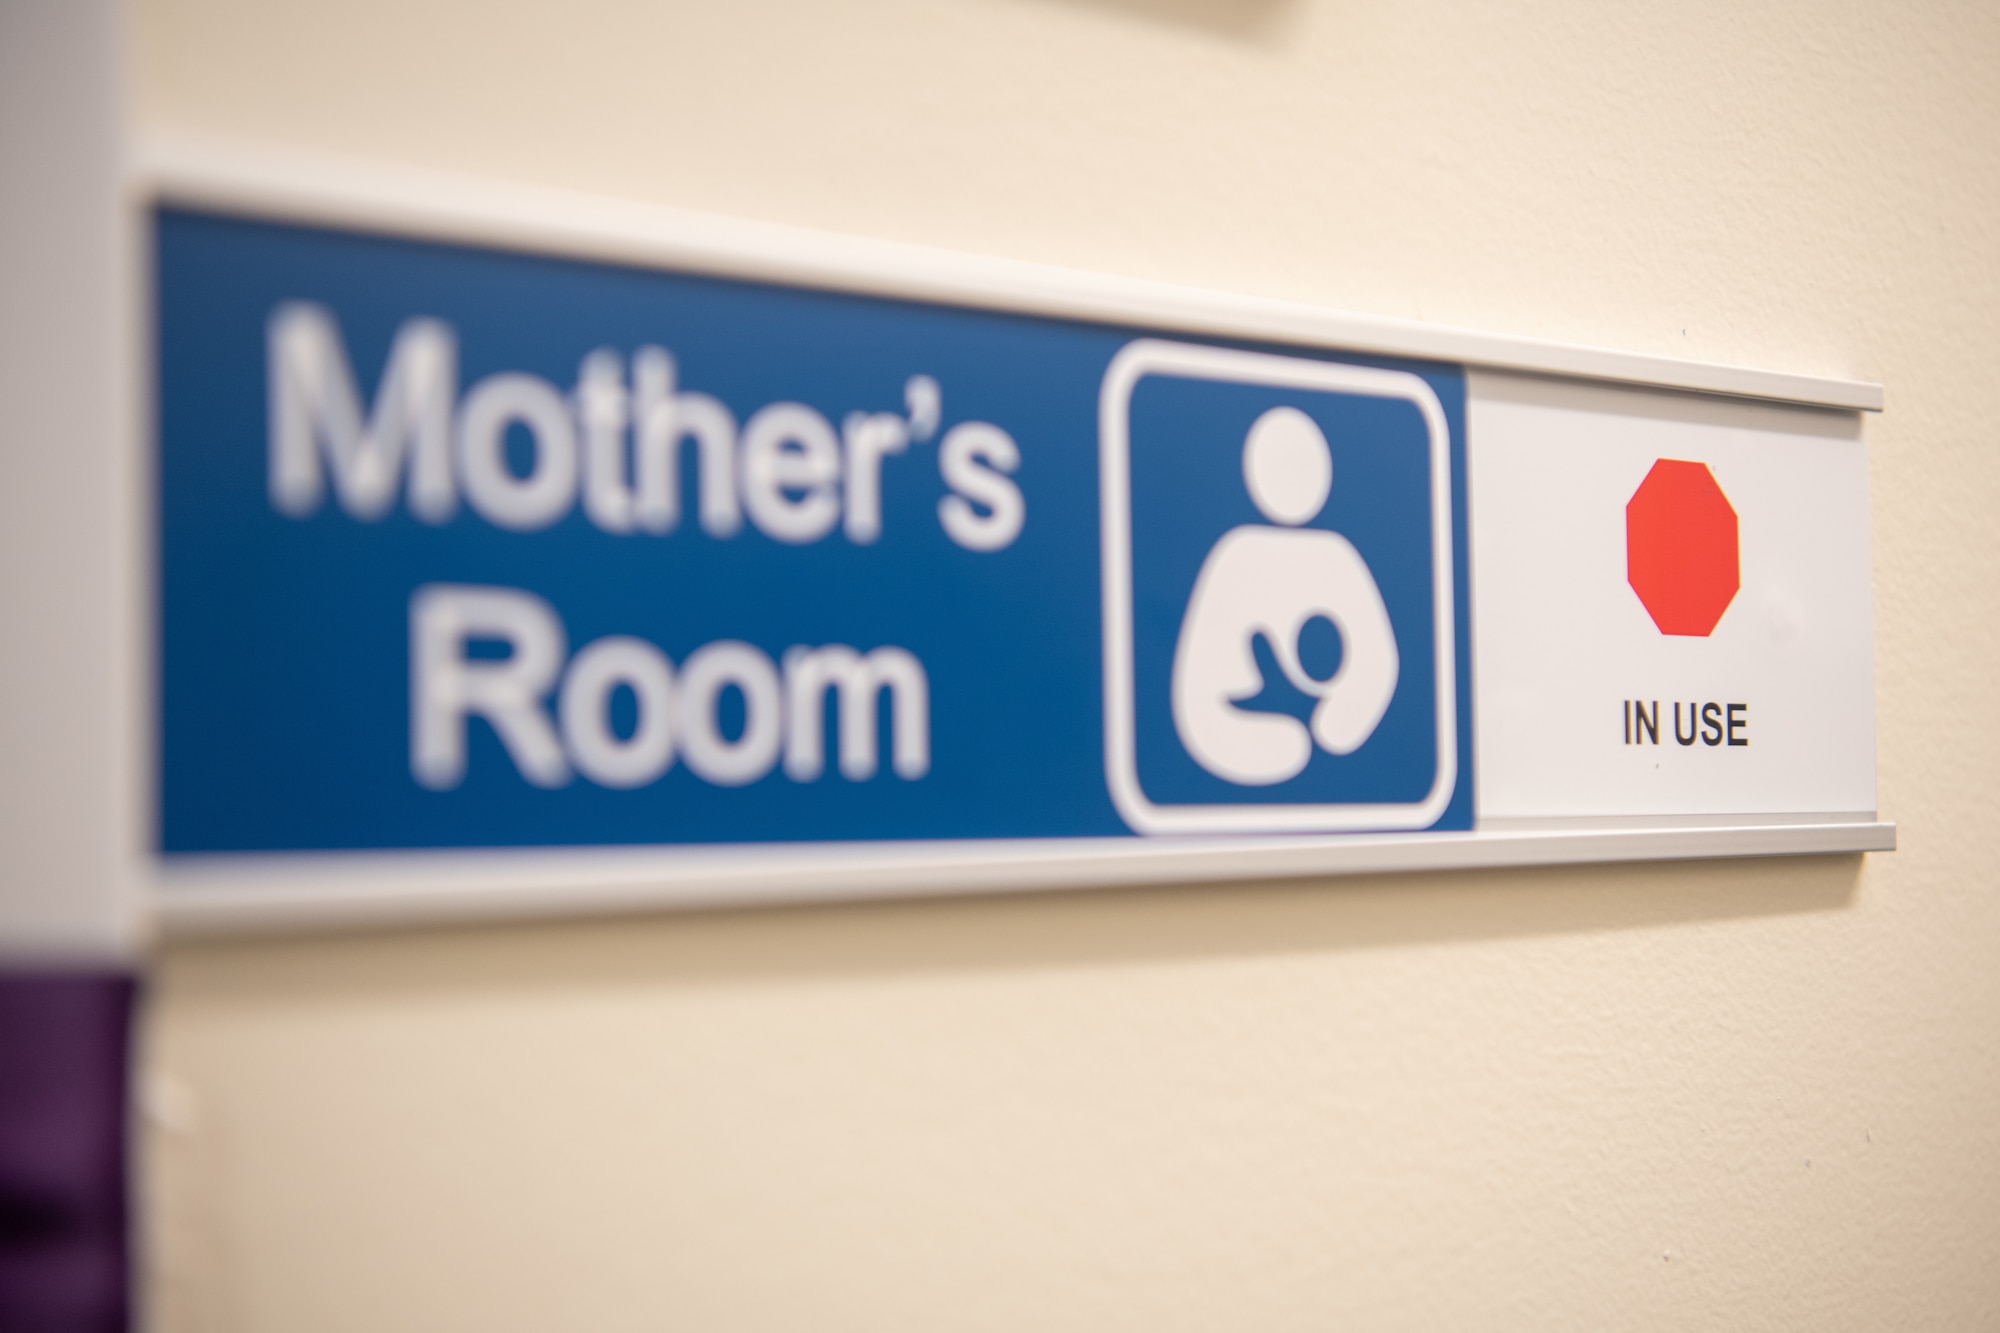 Mother's Room sign showing in use.